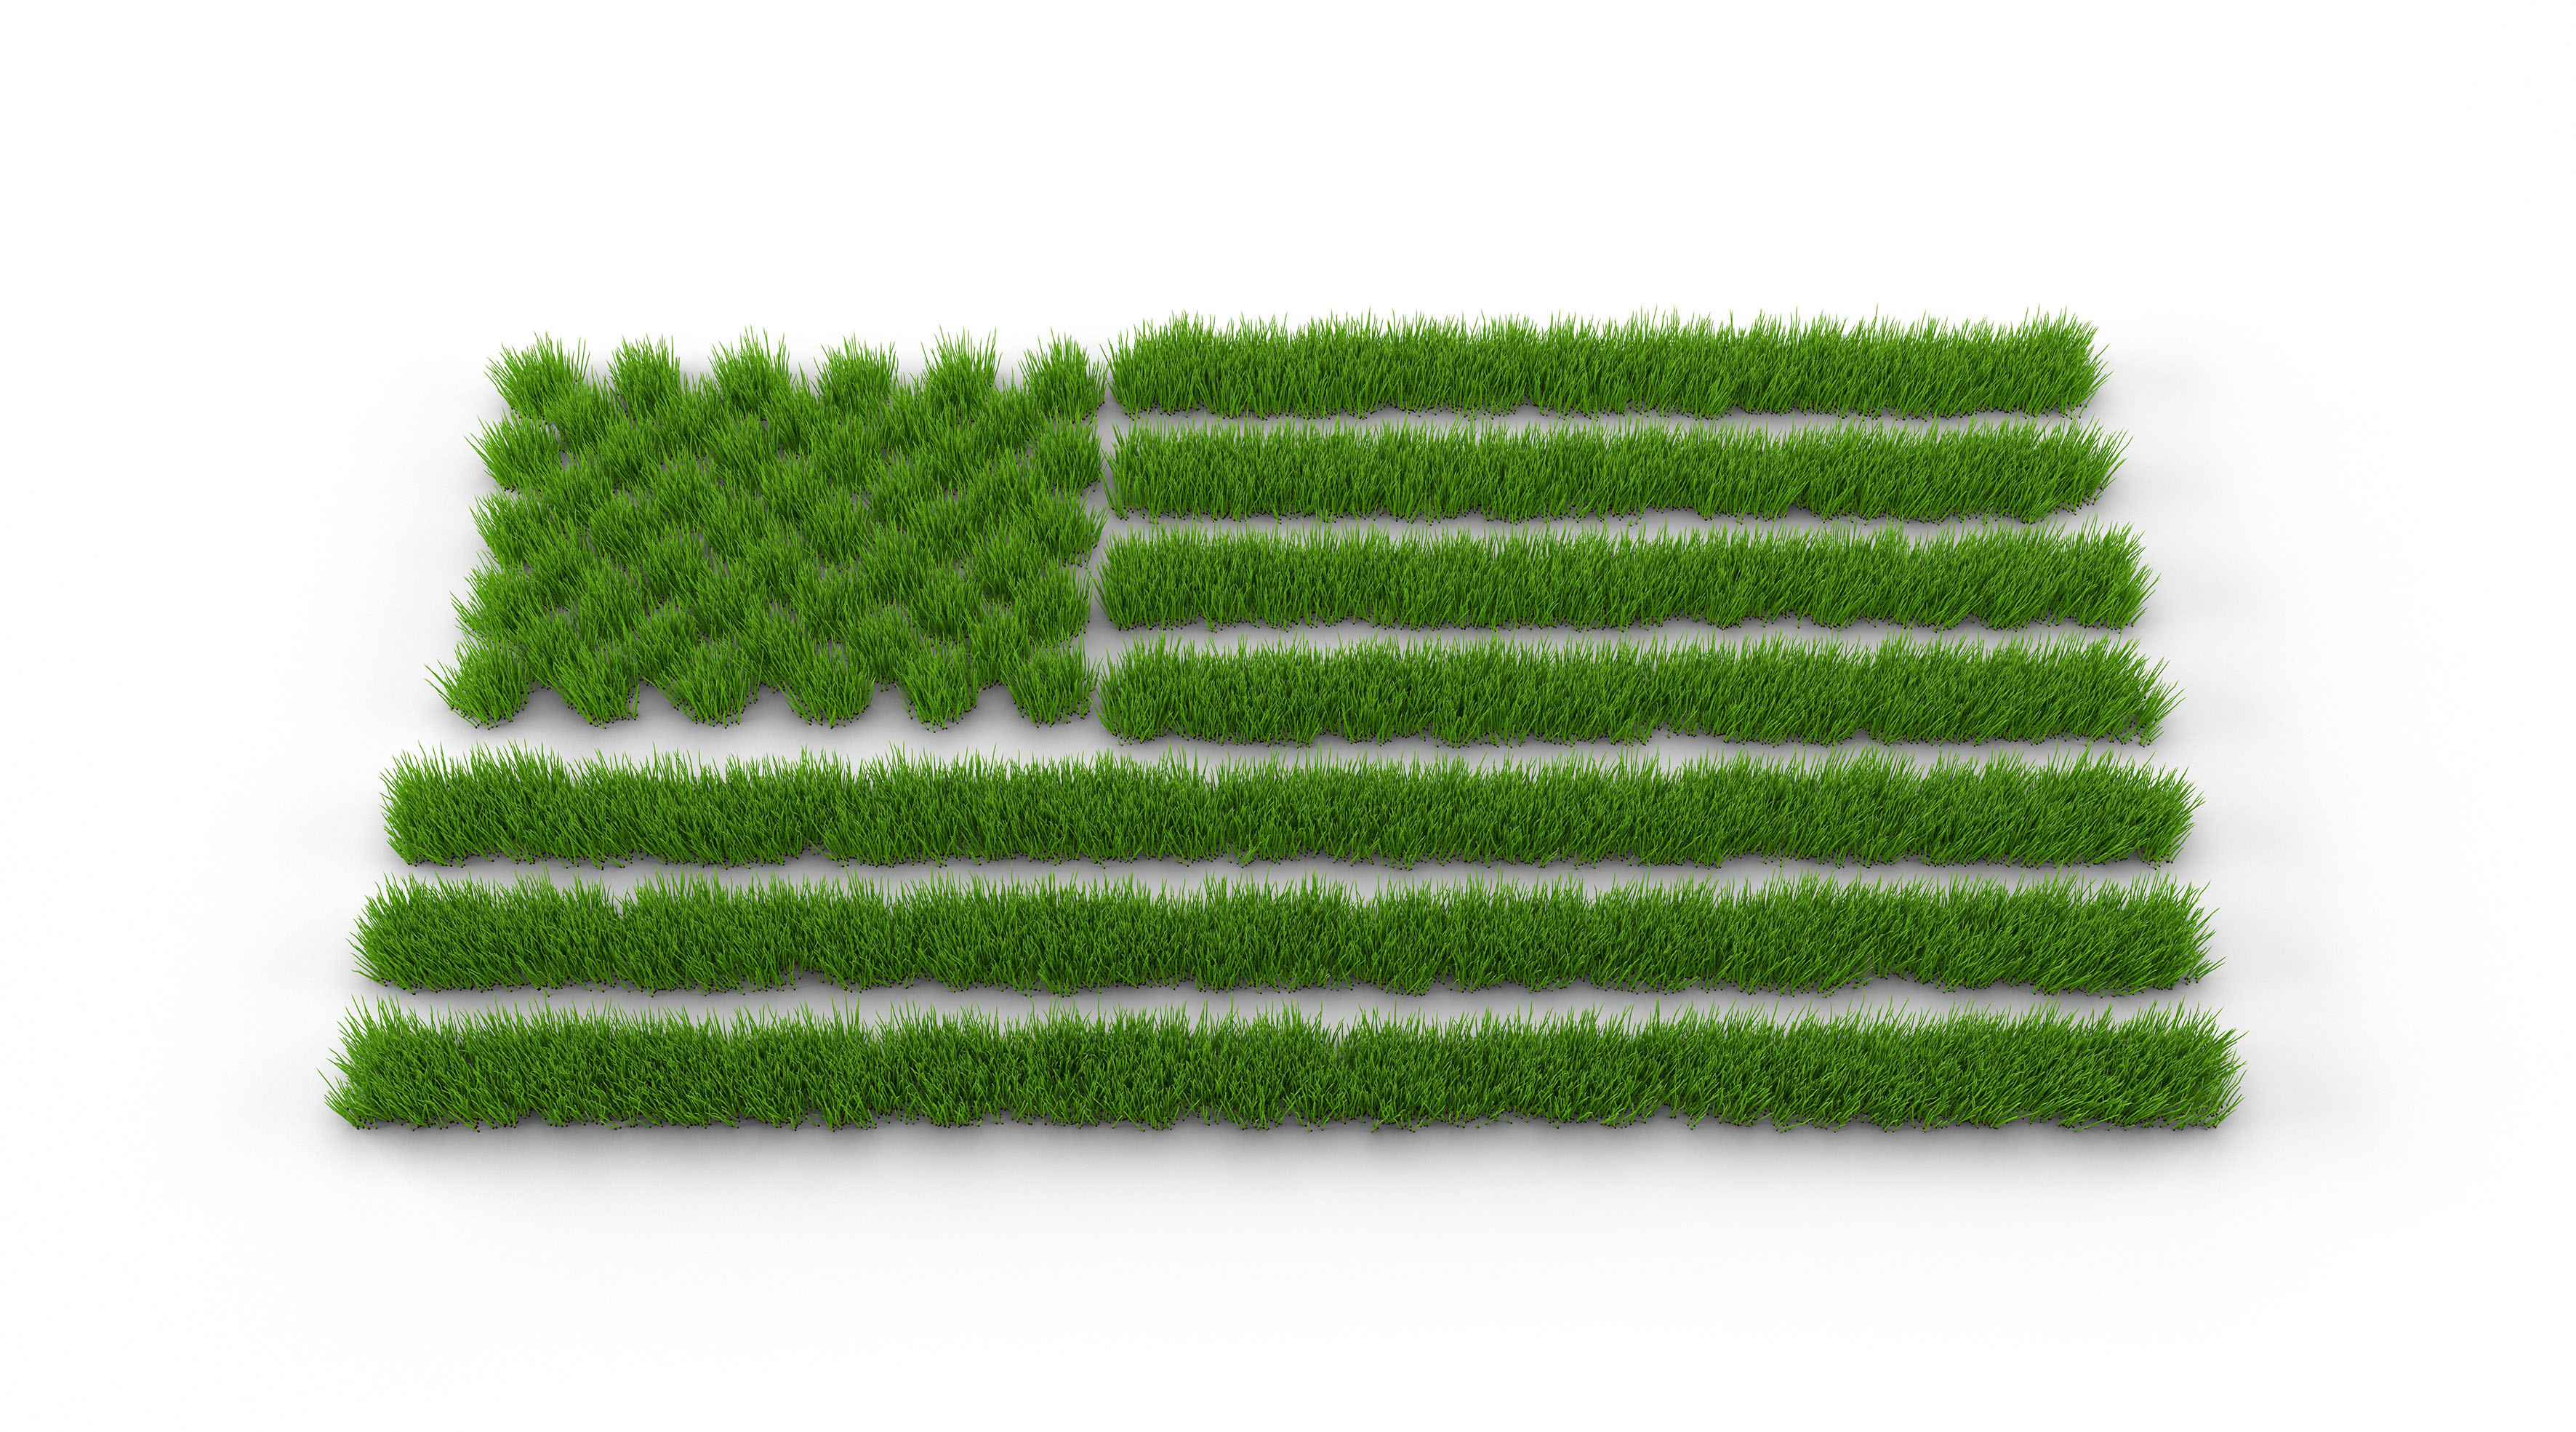 /asset/media/Feature/Article/PVB/The-American-jobs-plan-A-path-to-sustainability/the-american-jobs-plan-a-path-to-sustainability-banner.jpg